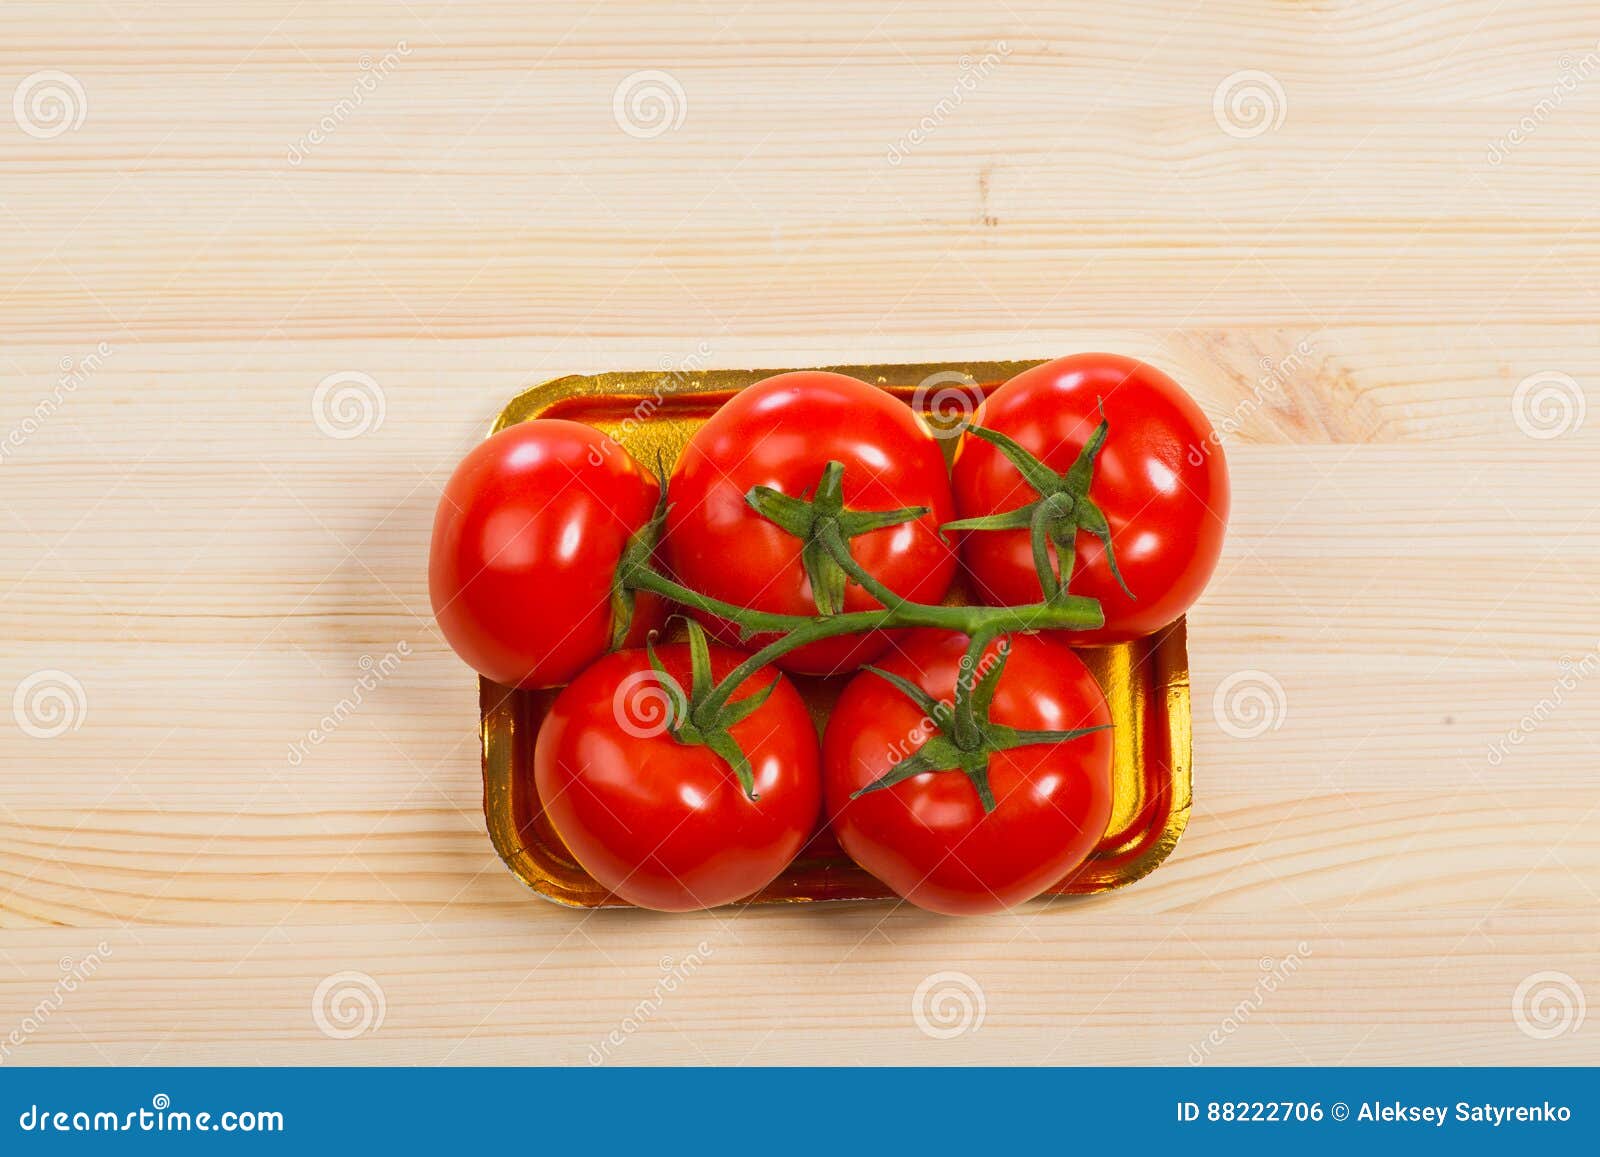 Five fresh red tomatoes with green stem in the tray , isolated on the background.